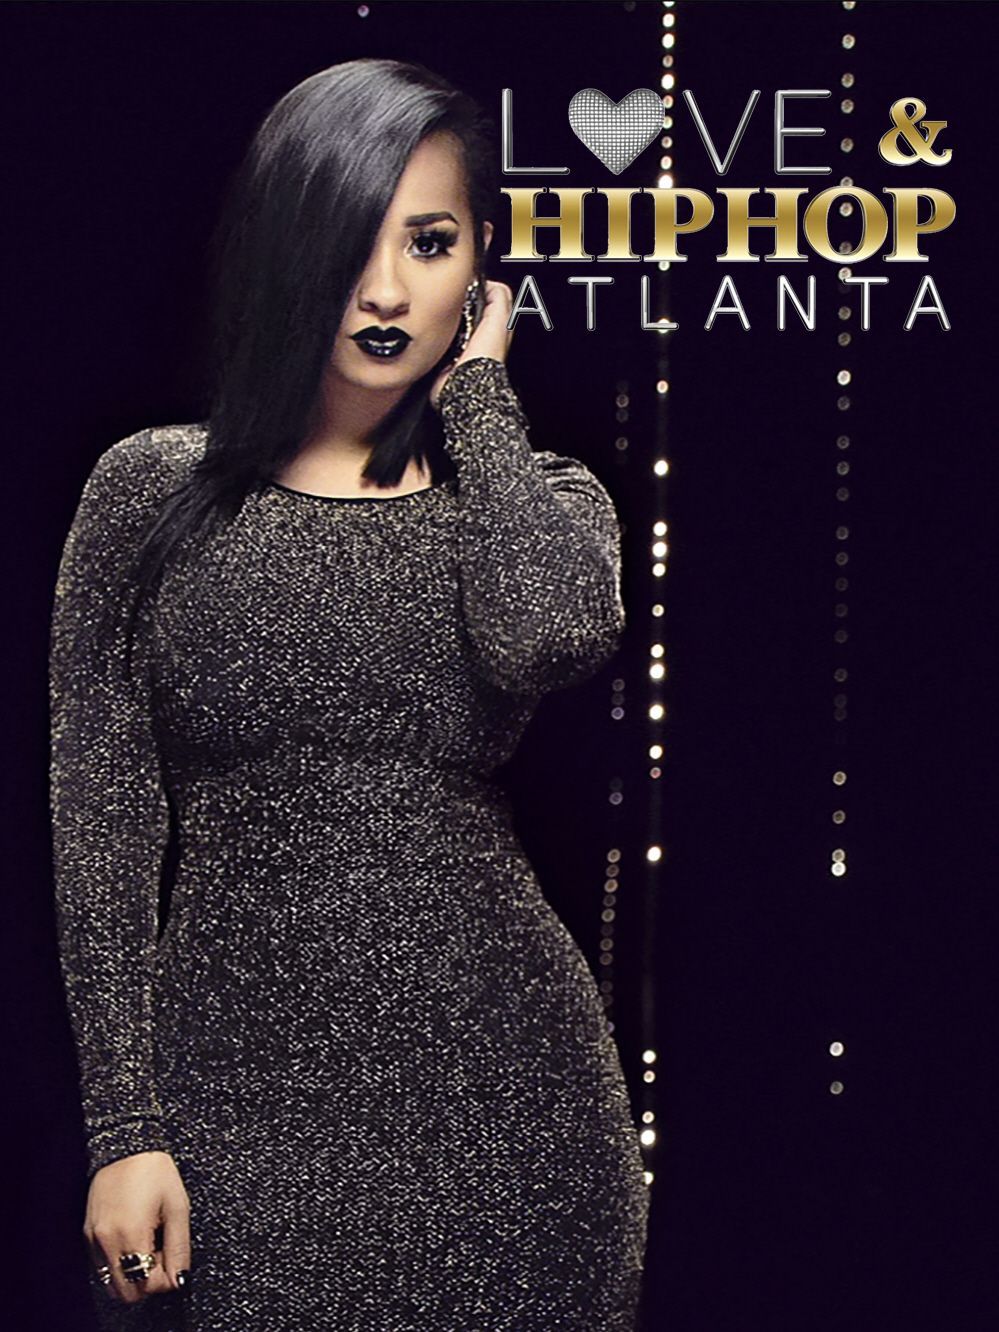 watch love and hip hop hollywood season 5 online free